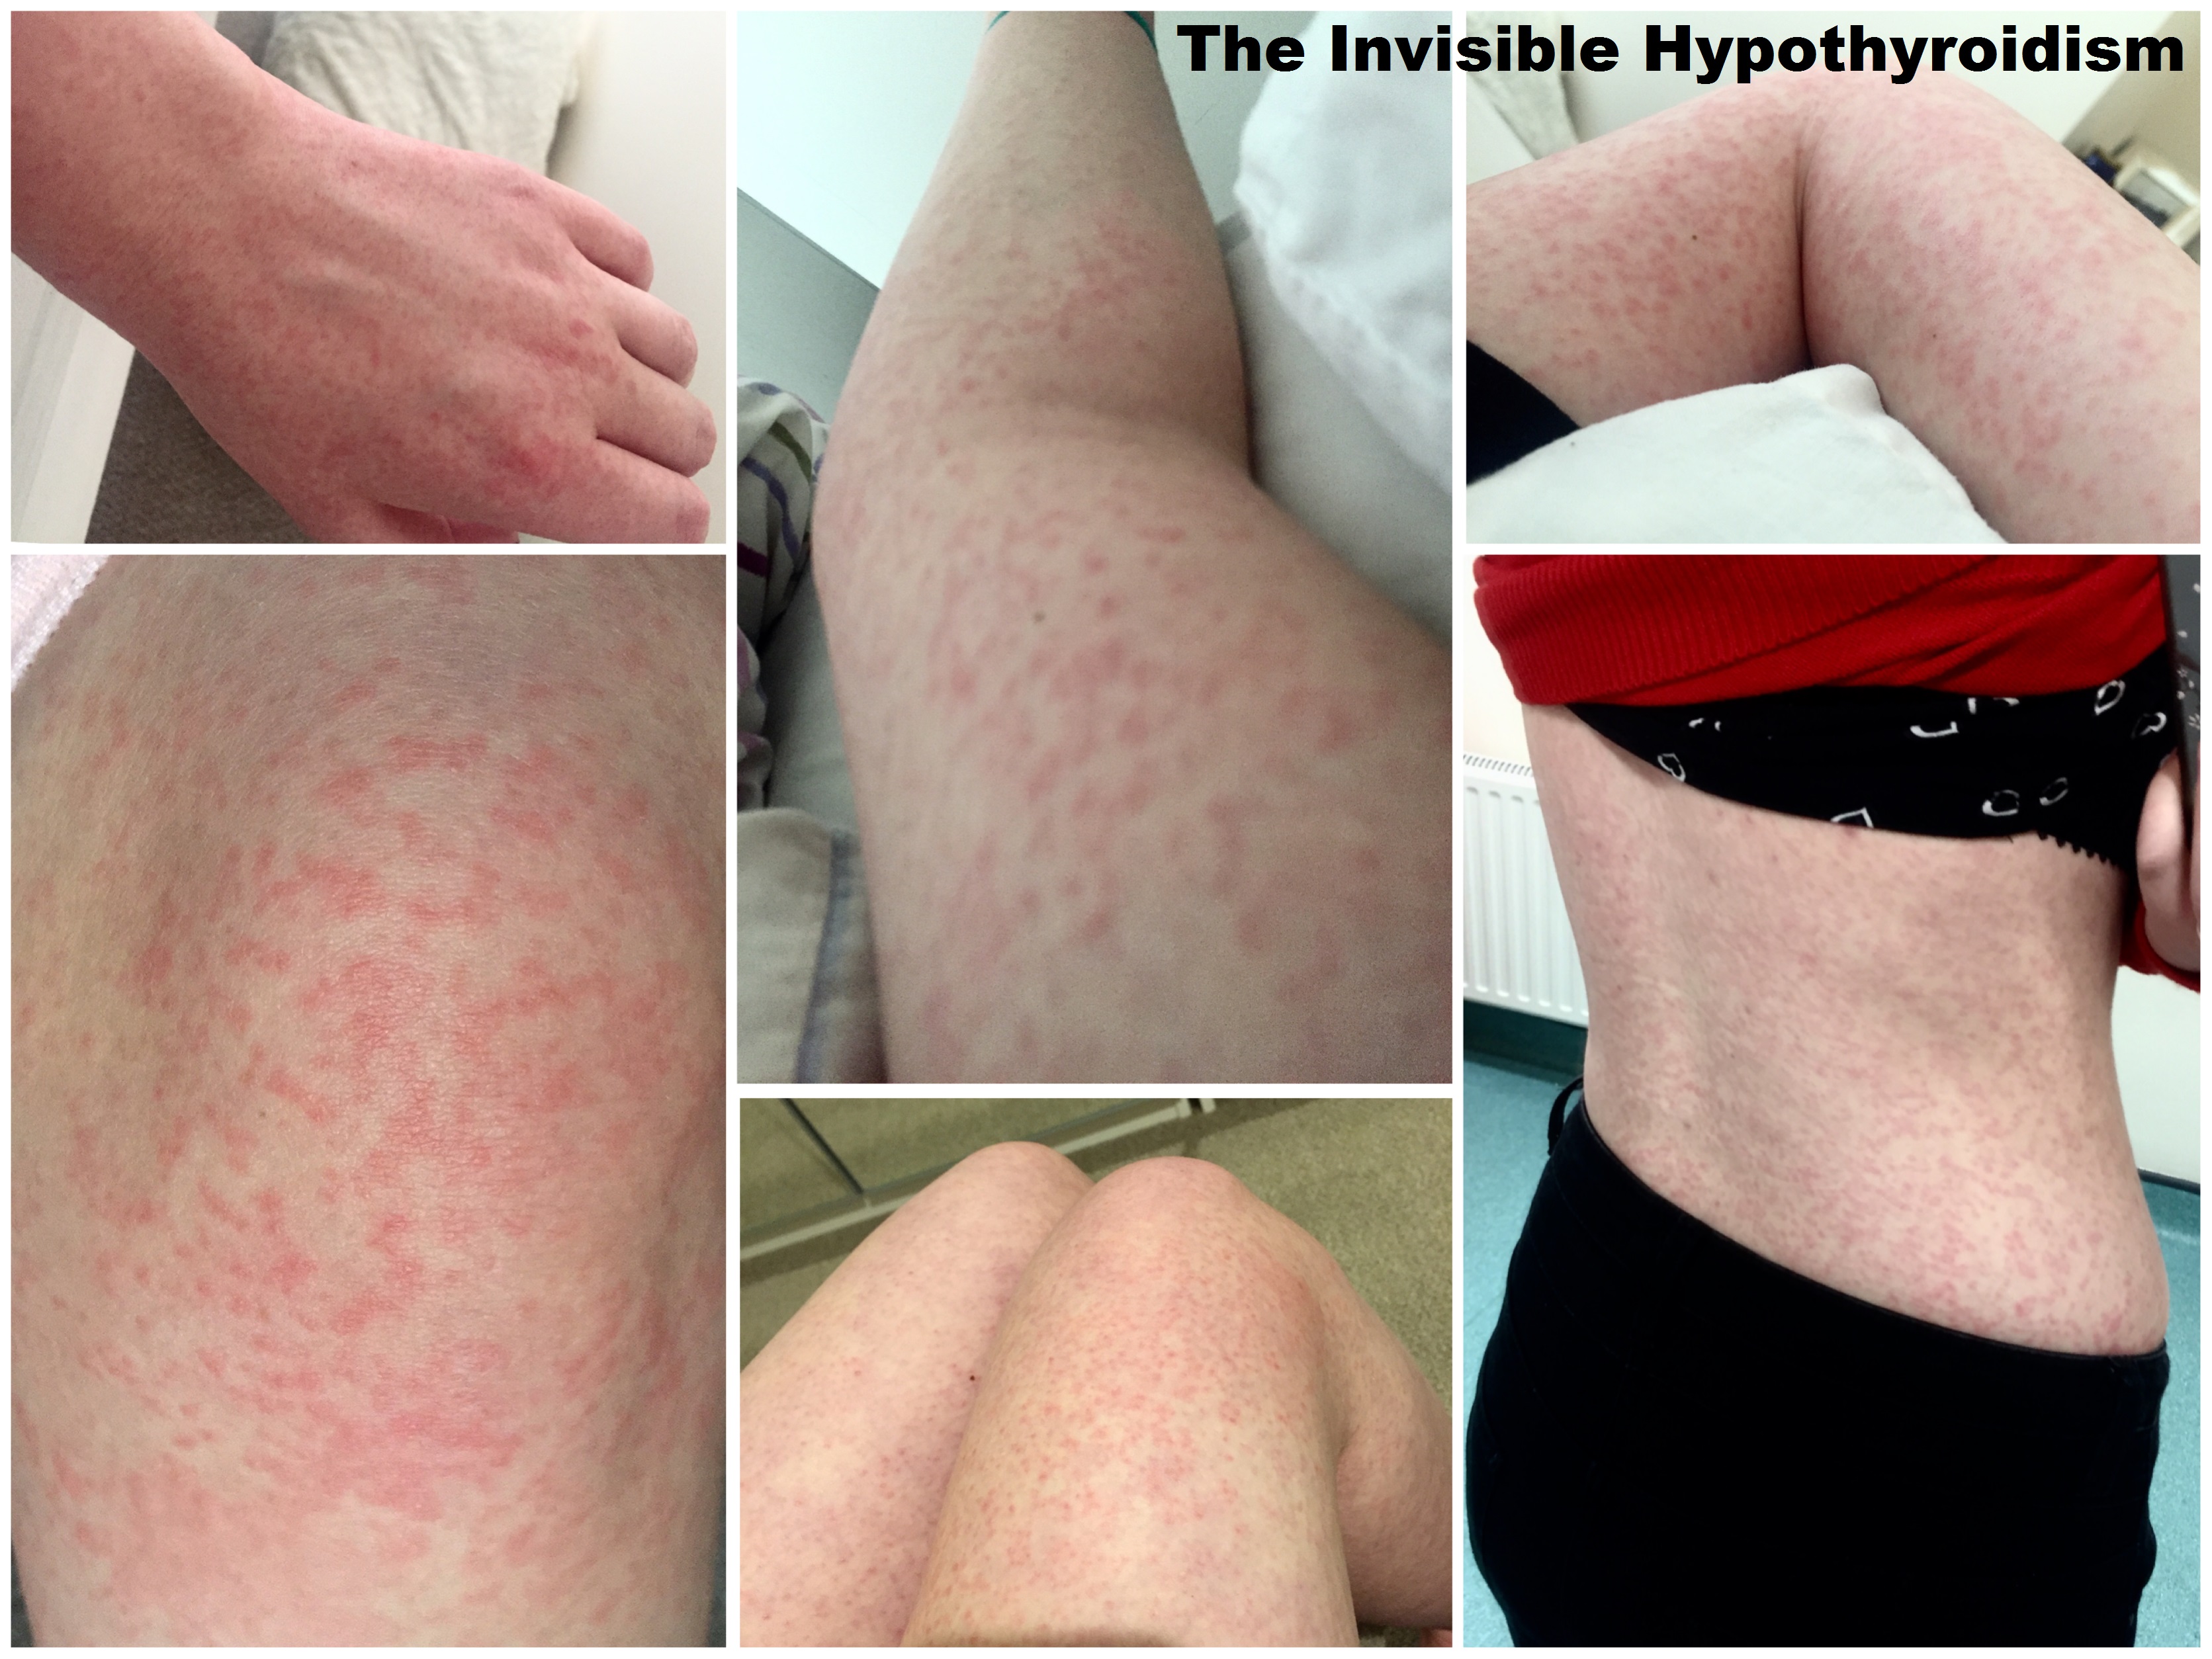 A collage of photos showing a severe allergic reaction across all of Rachel's body